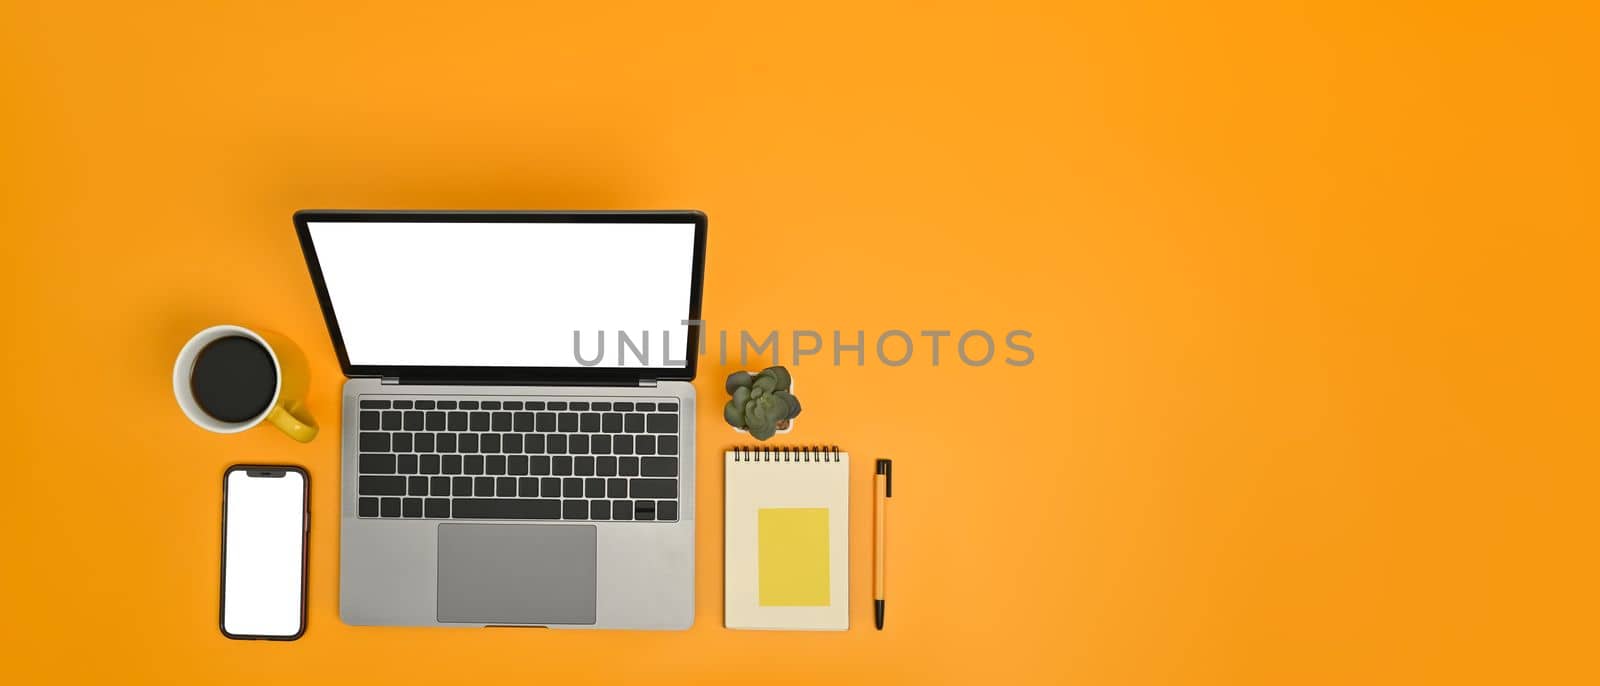 Horizontal image of laptop, smart phone notepad and coffee mug on yellow background. Copy space for text information.